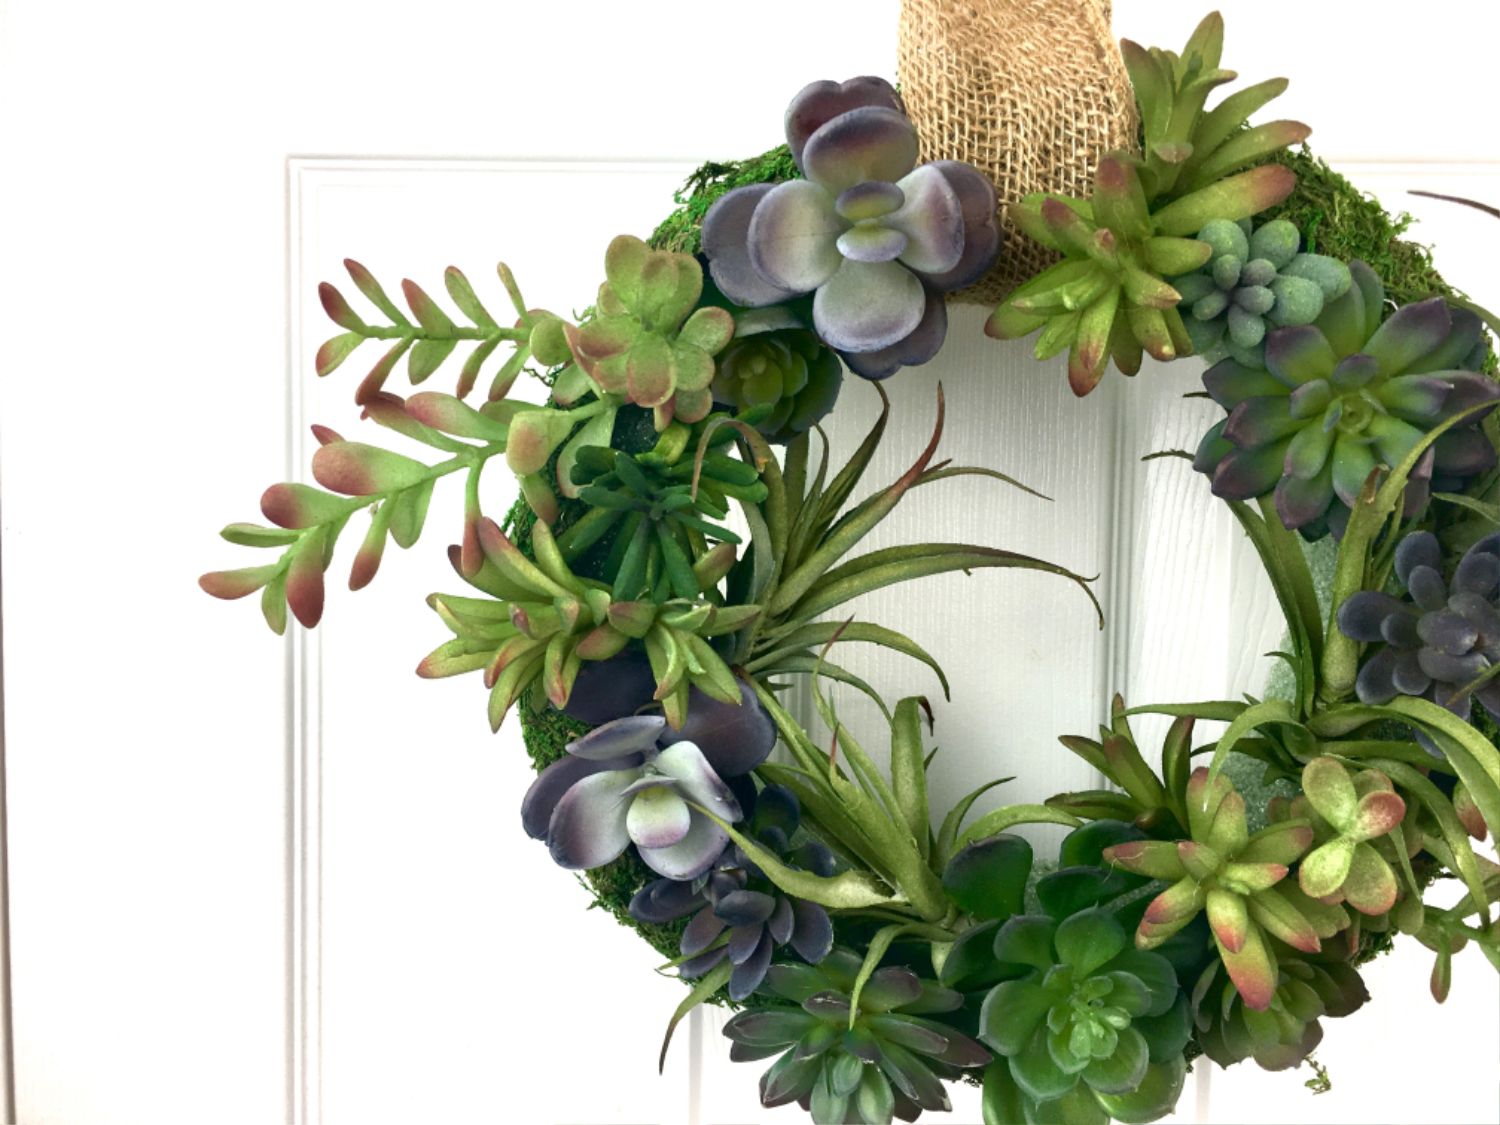 How to Make the Easiest Faux Succulent and Moss Wreath